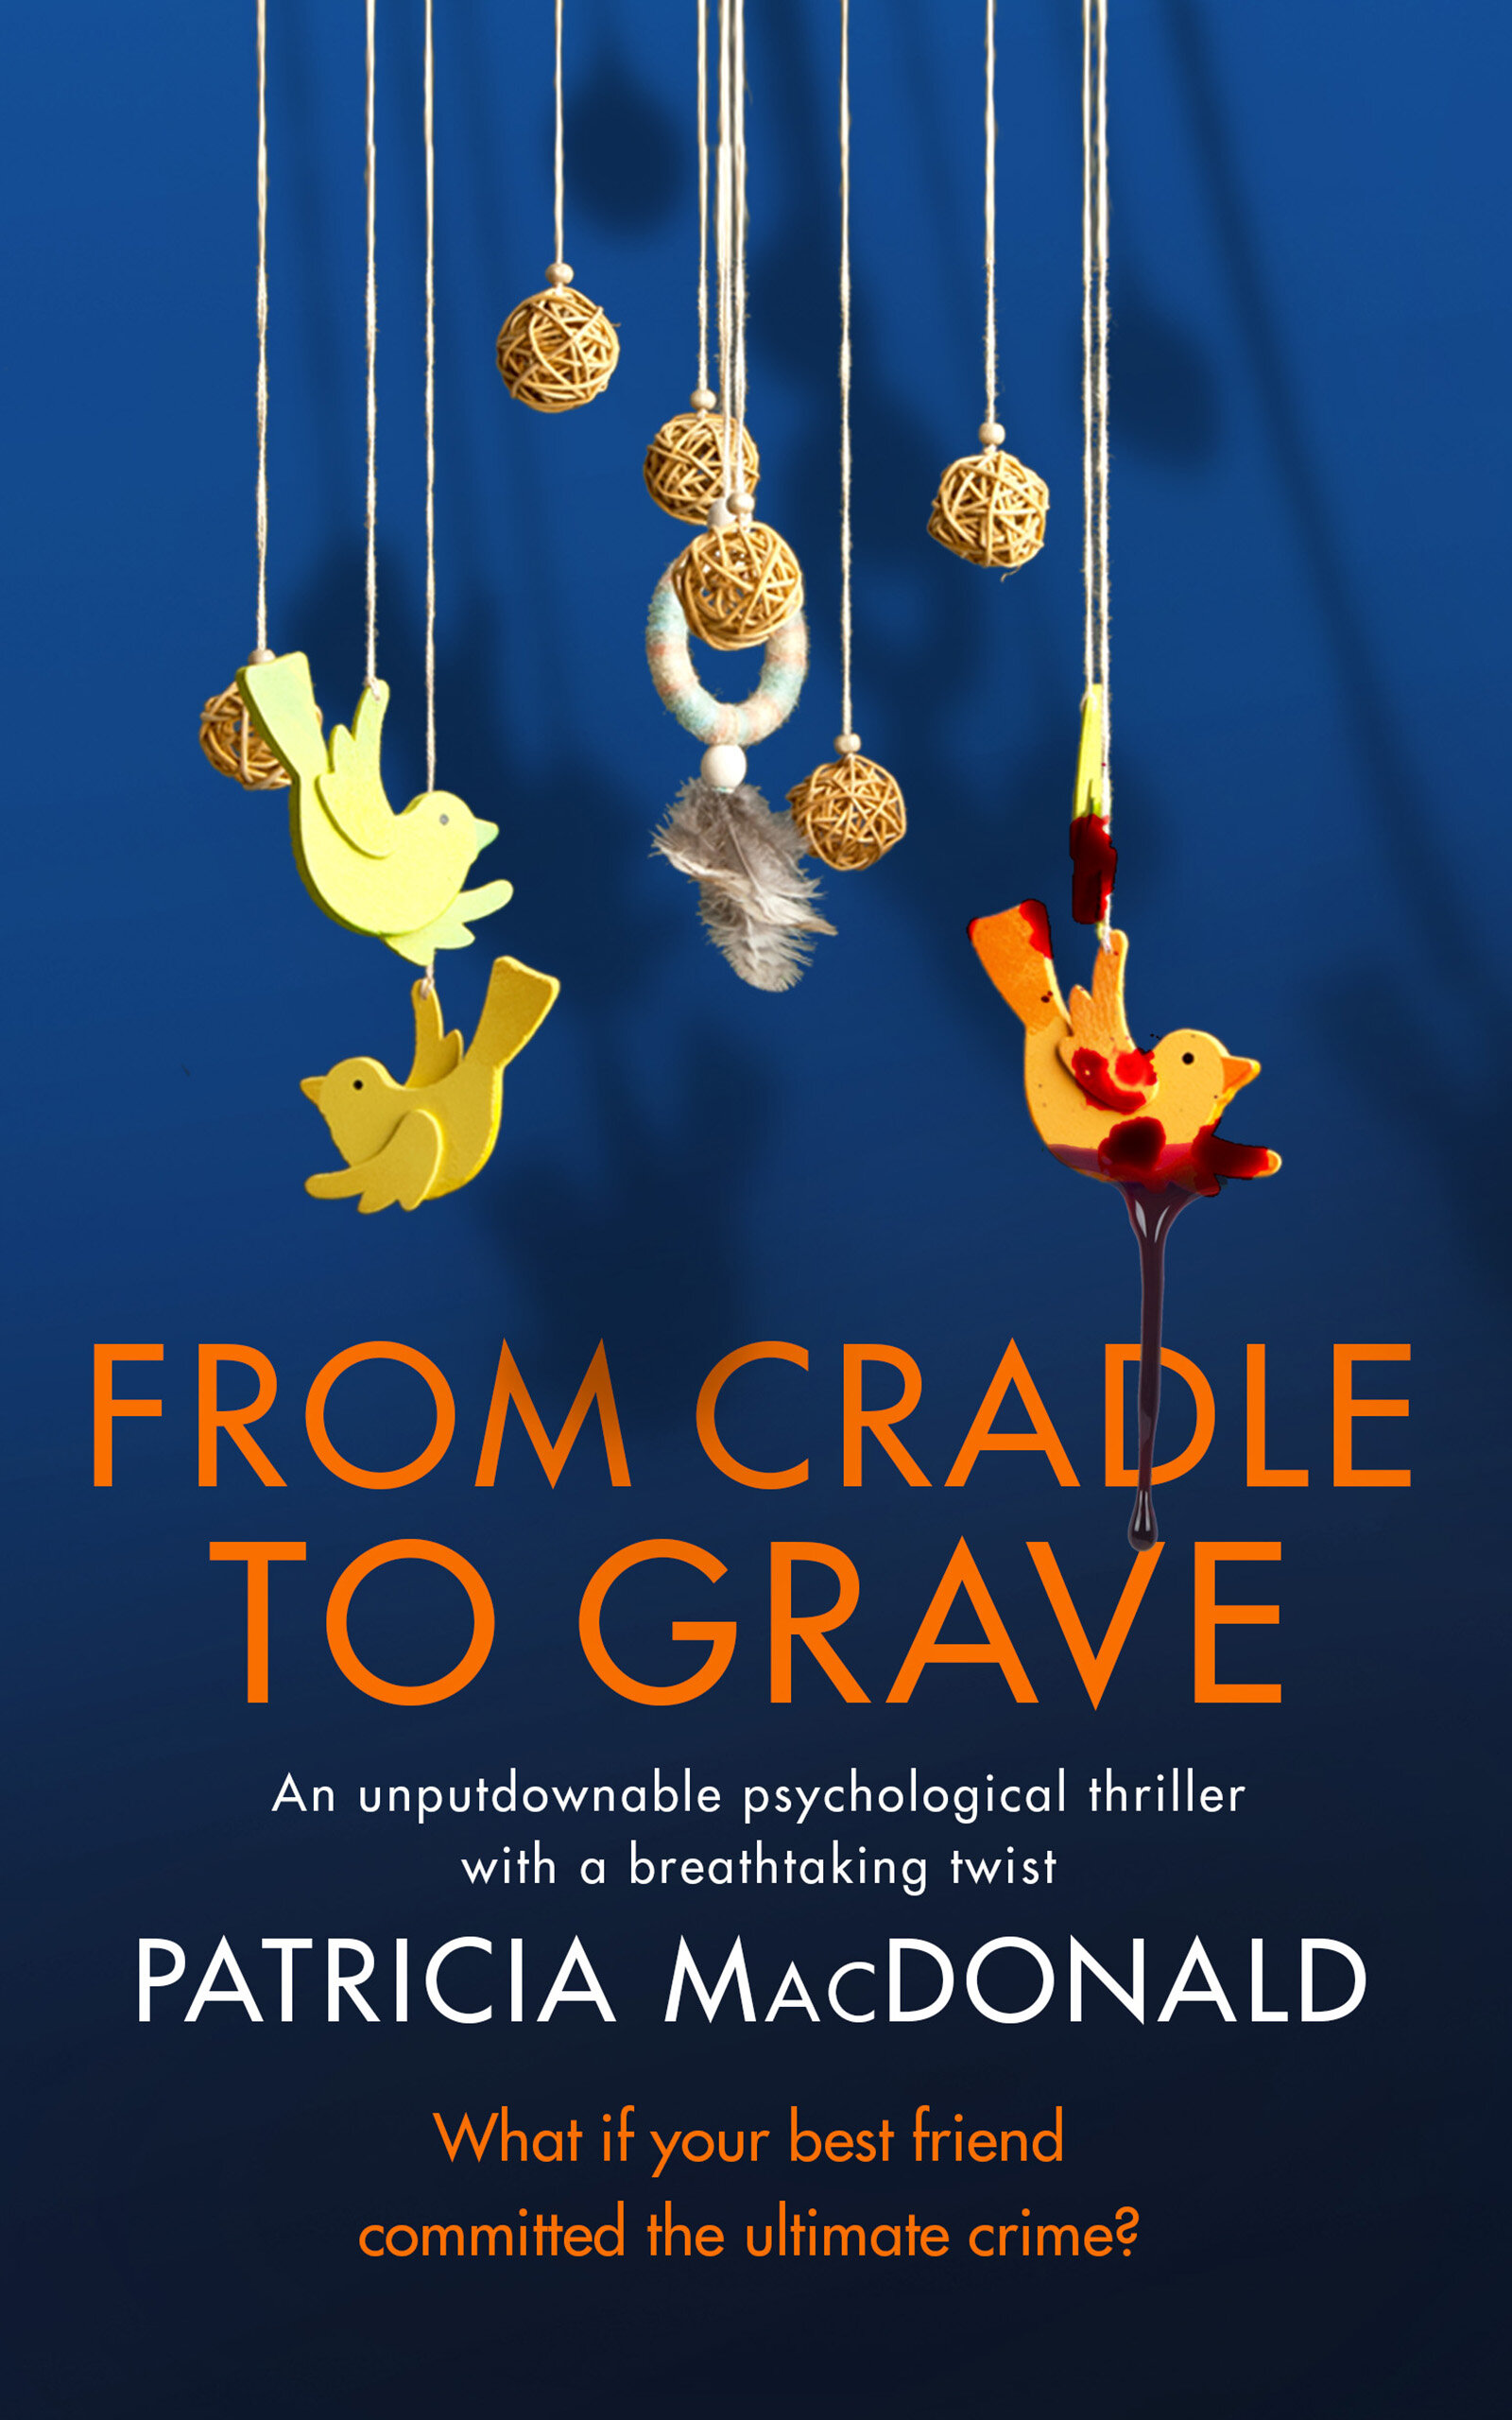 FROM CRADLE TO GRAVE publish cover.jpg